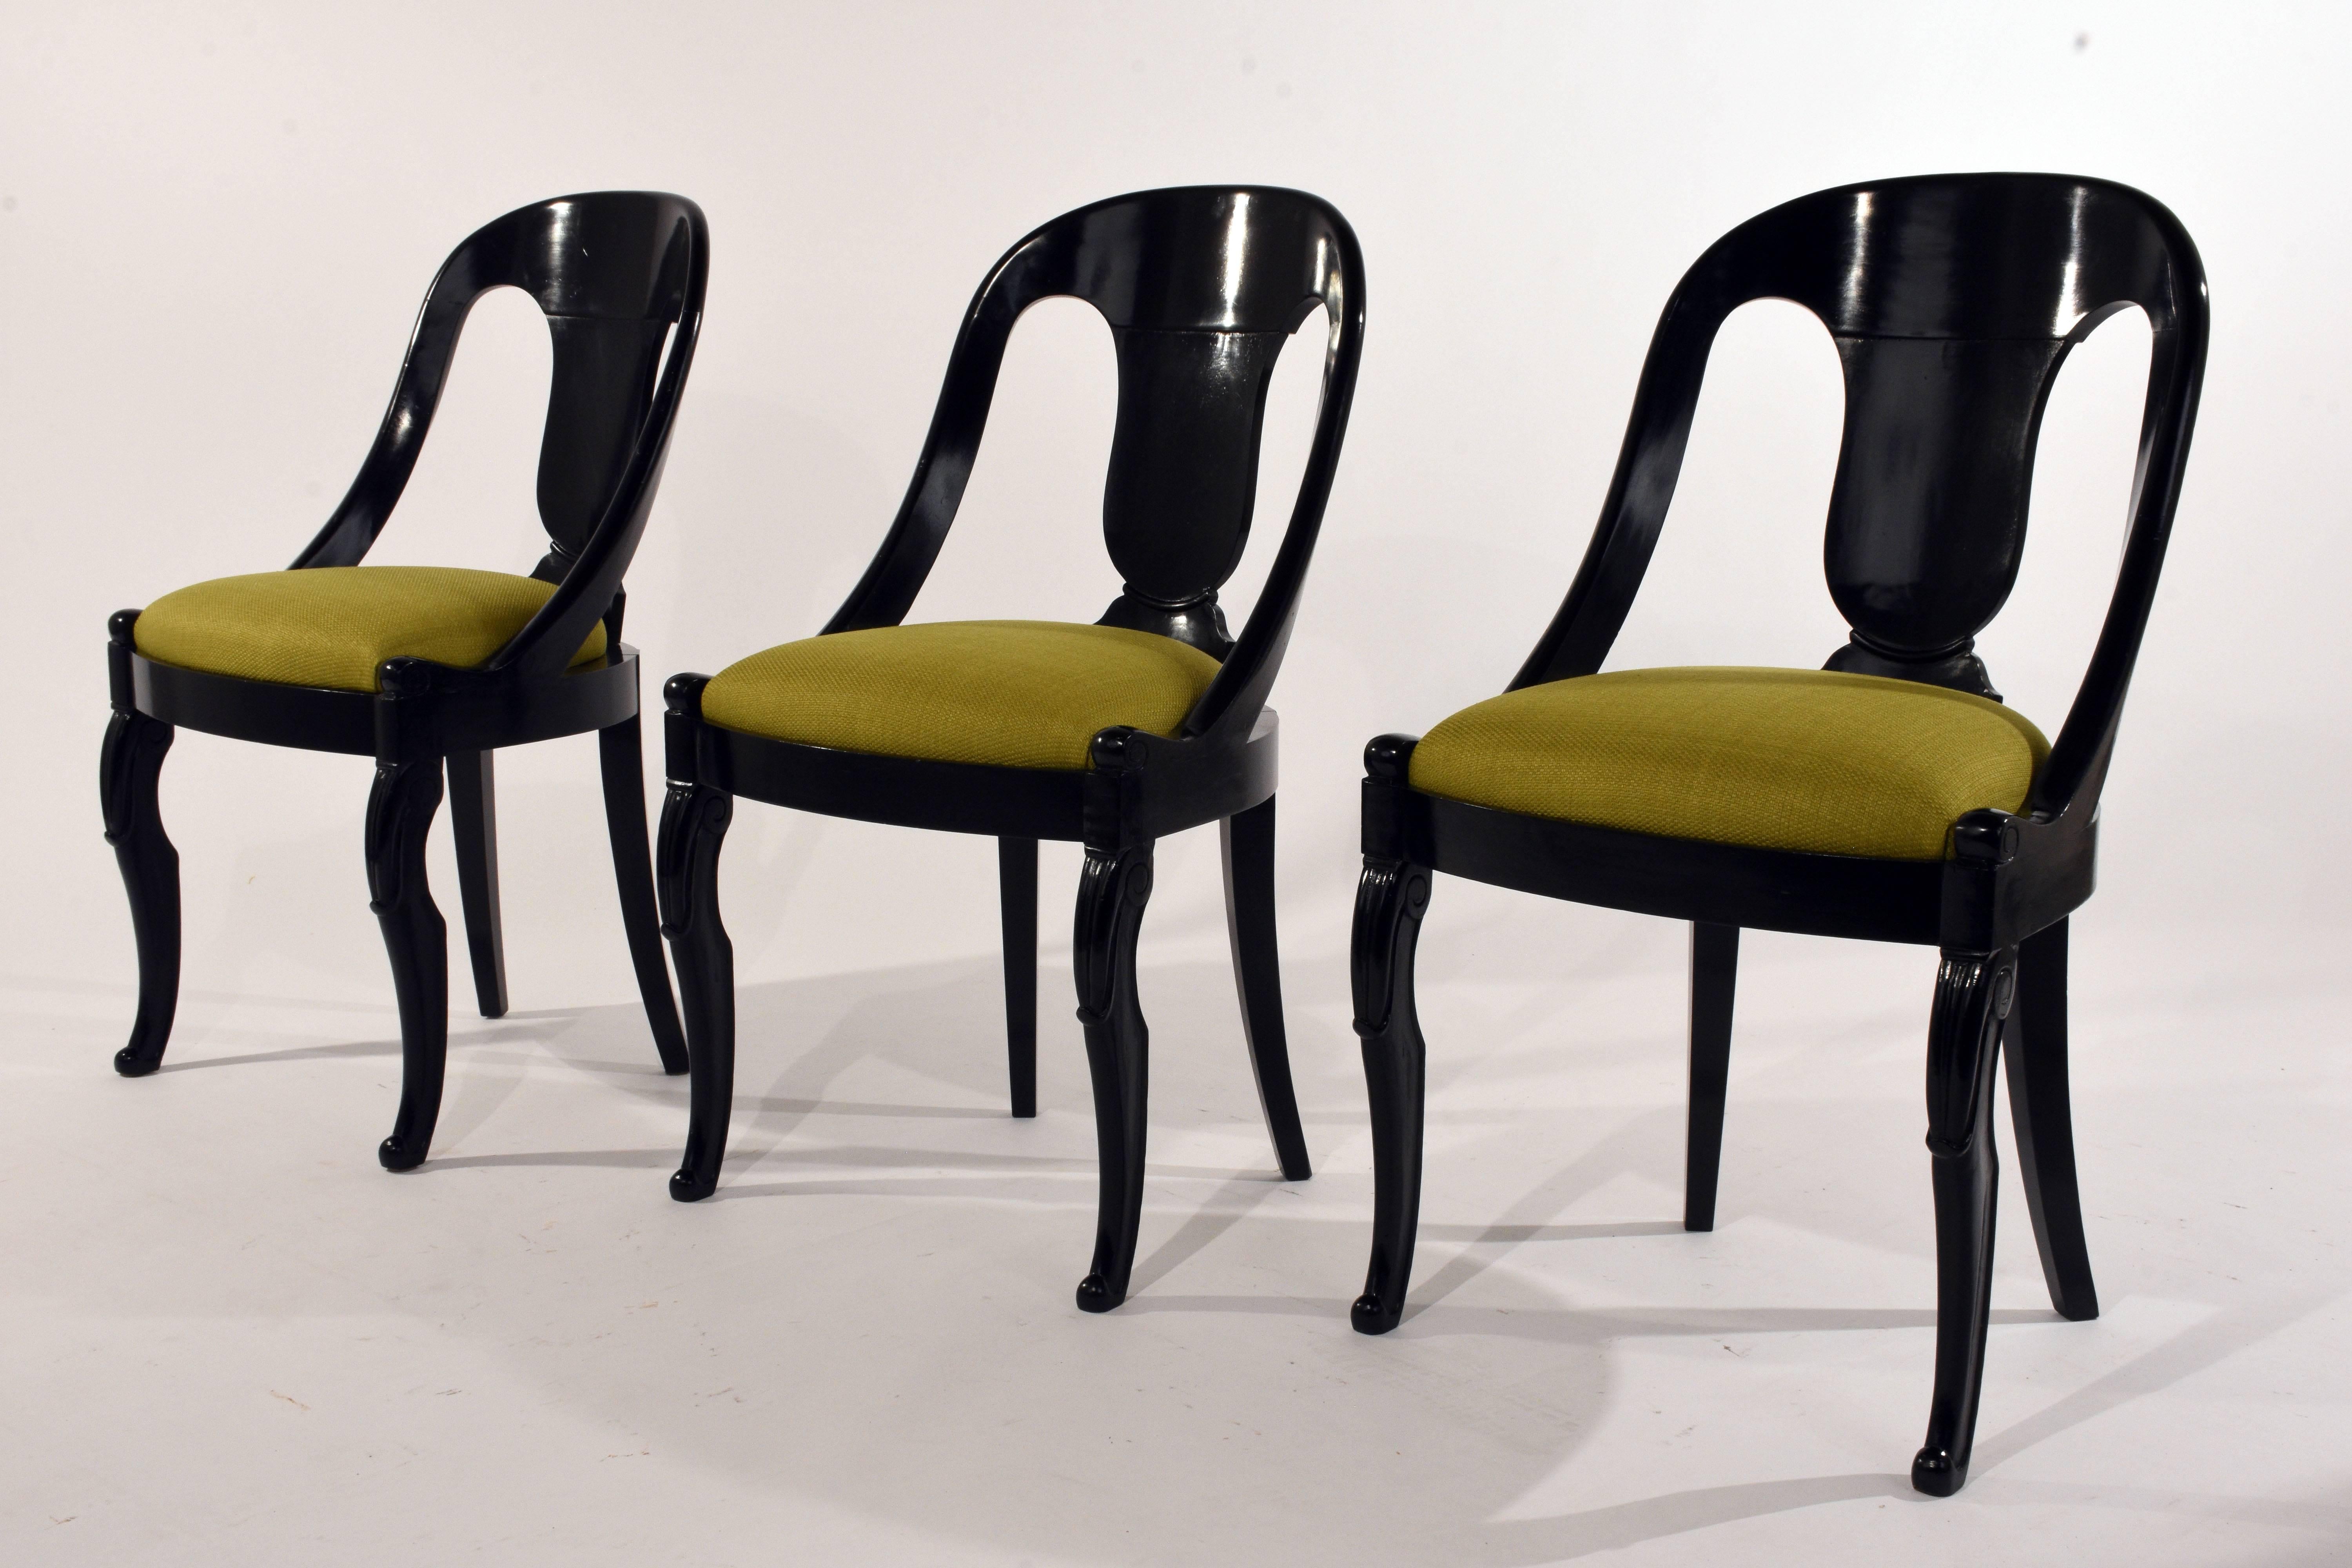 This set of six 1930s Empire-style dining chairs feature mahogany wood frames that have been ebonized with a lacquered finish. The curved gondola back shapes the back of the chairs and leads into the carved serpentine legs. The carved legs haves